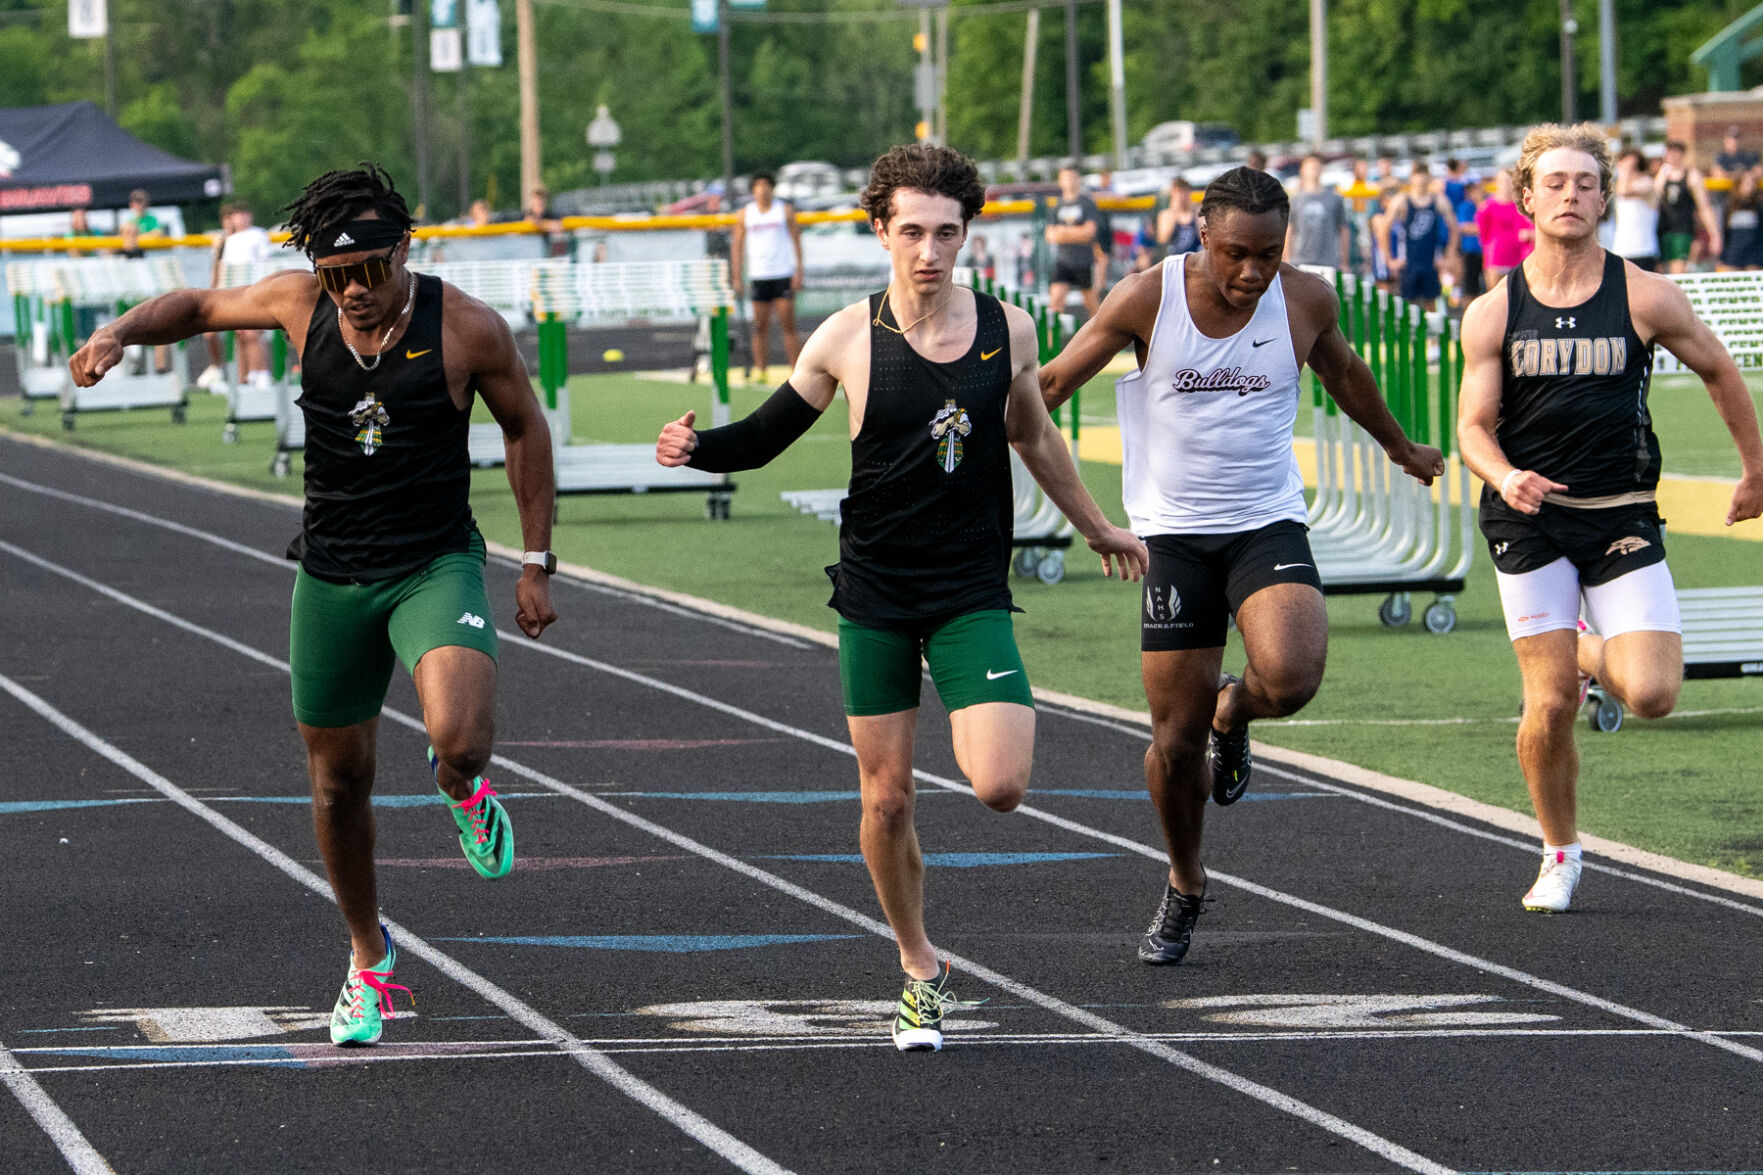 Floyd Central Highlanders Triumph with Record-Breaking Wins in Boys’ Track and Field